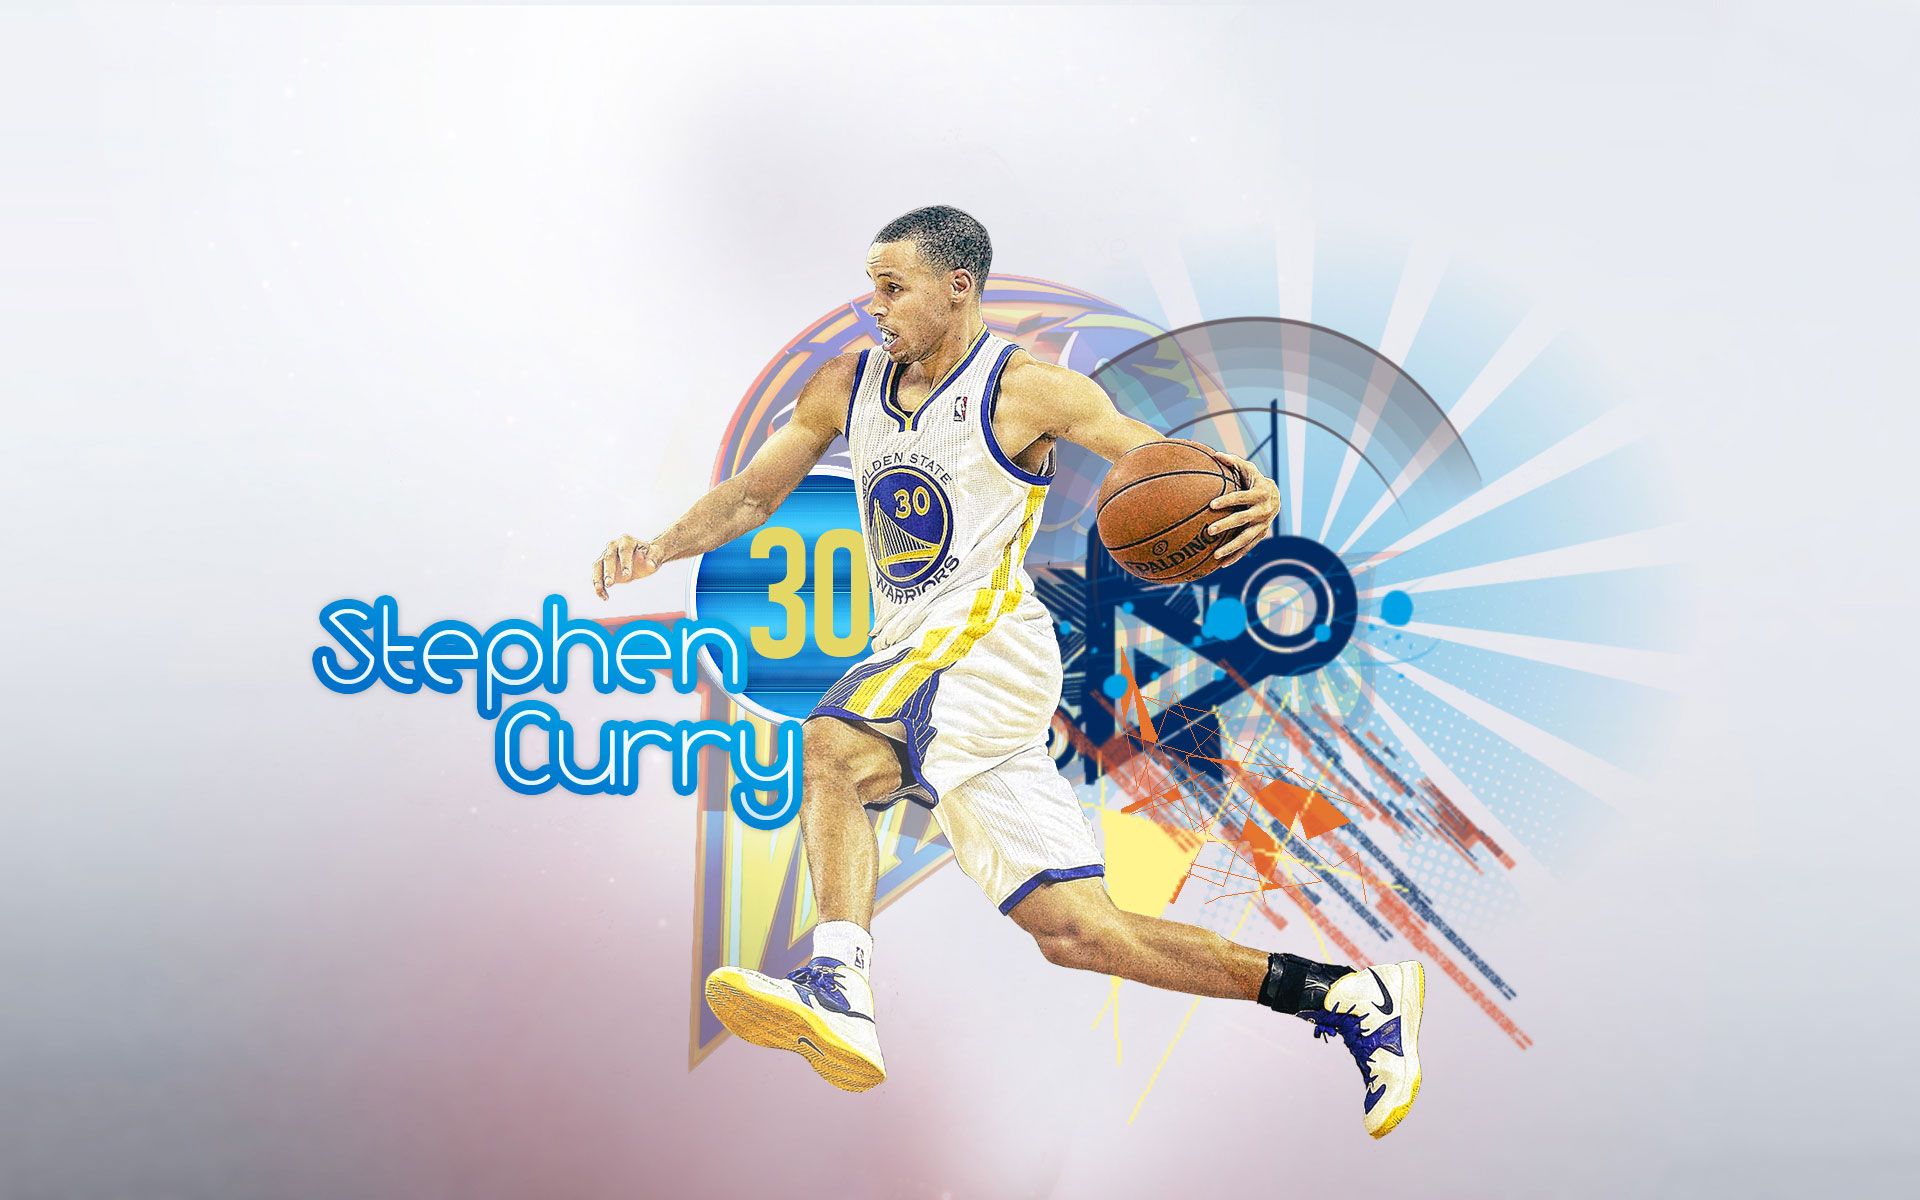 Stephen Curry wallpaper free download. Wallpaper, Background, Image, Art Photo. Stephen curry wallpaper, Stephen curry wallpaper hd, Curry wallpaper